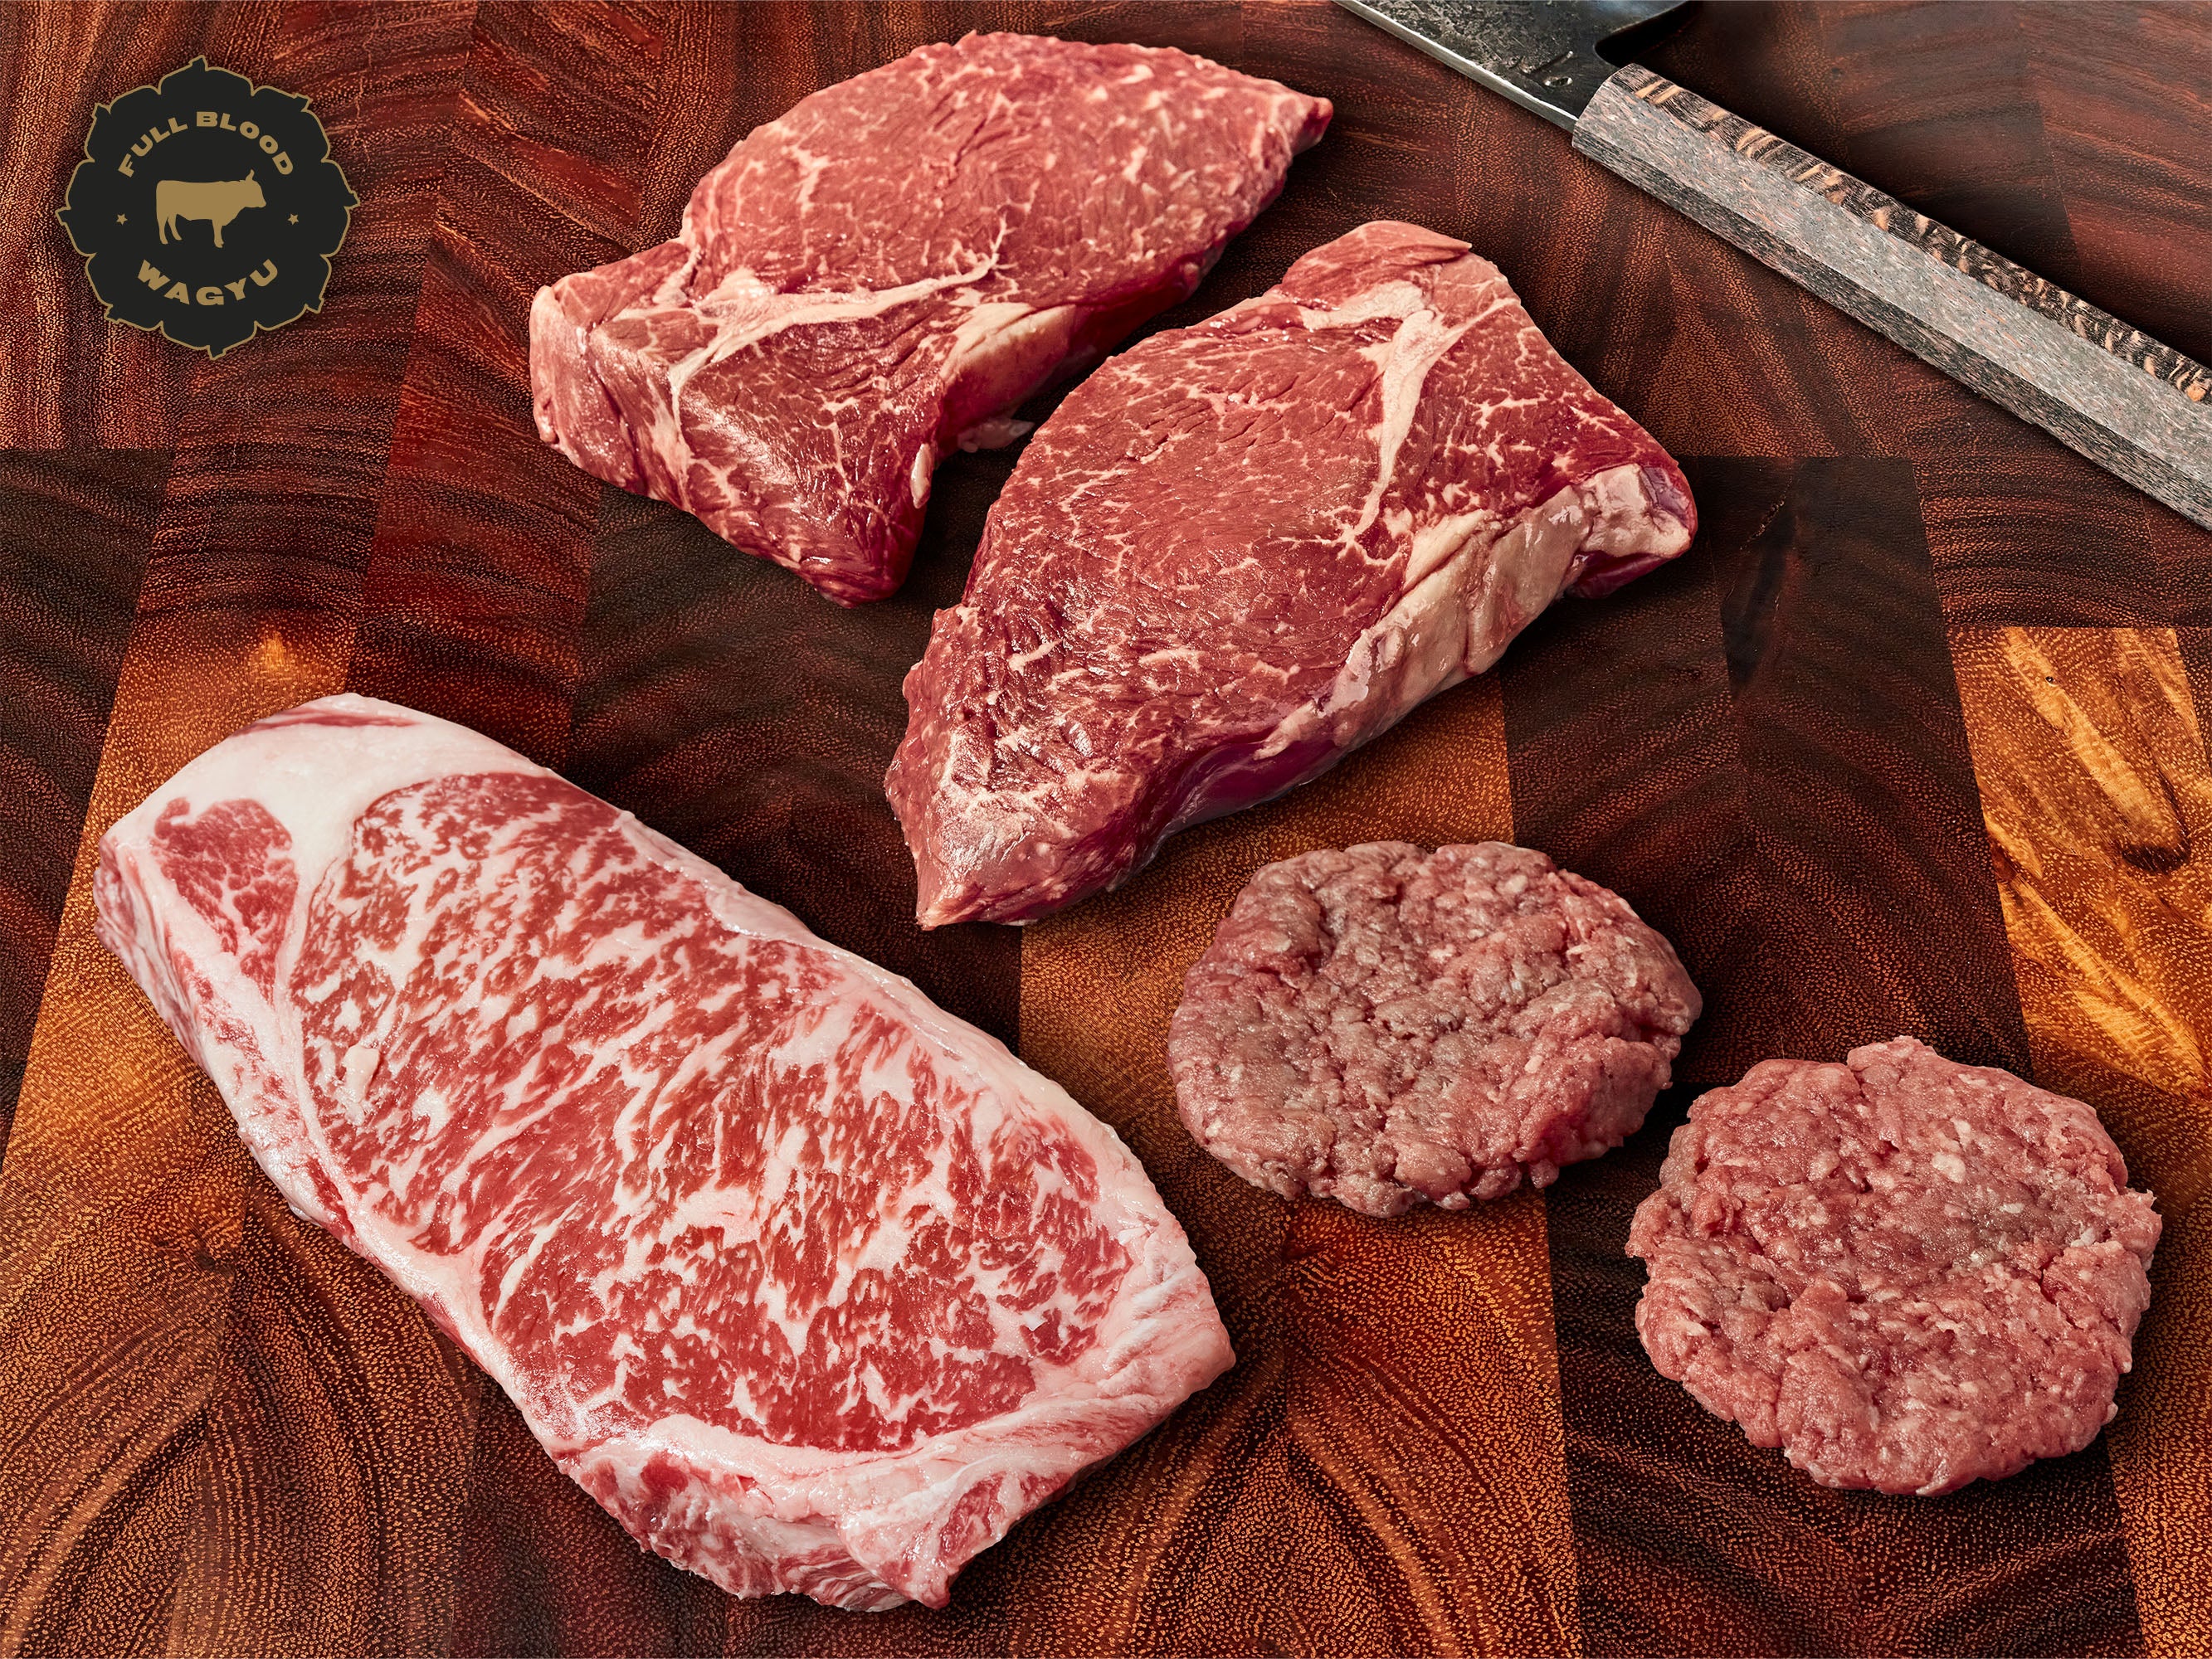 Assorted raw Wagyu beef cuts on a wood-patterned surface with a knife and cutting board.